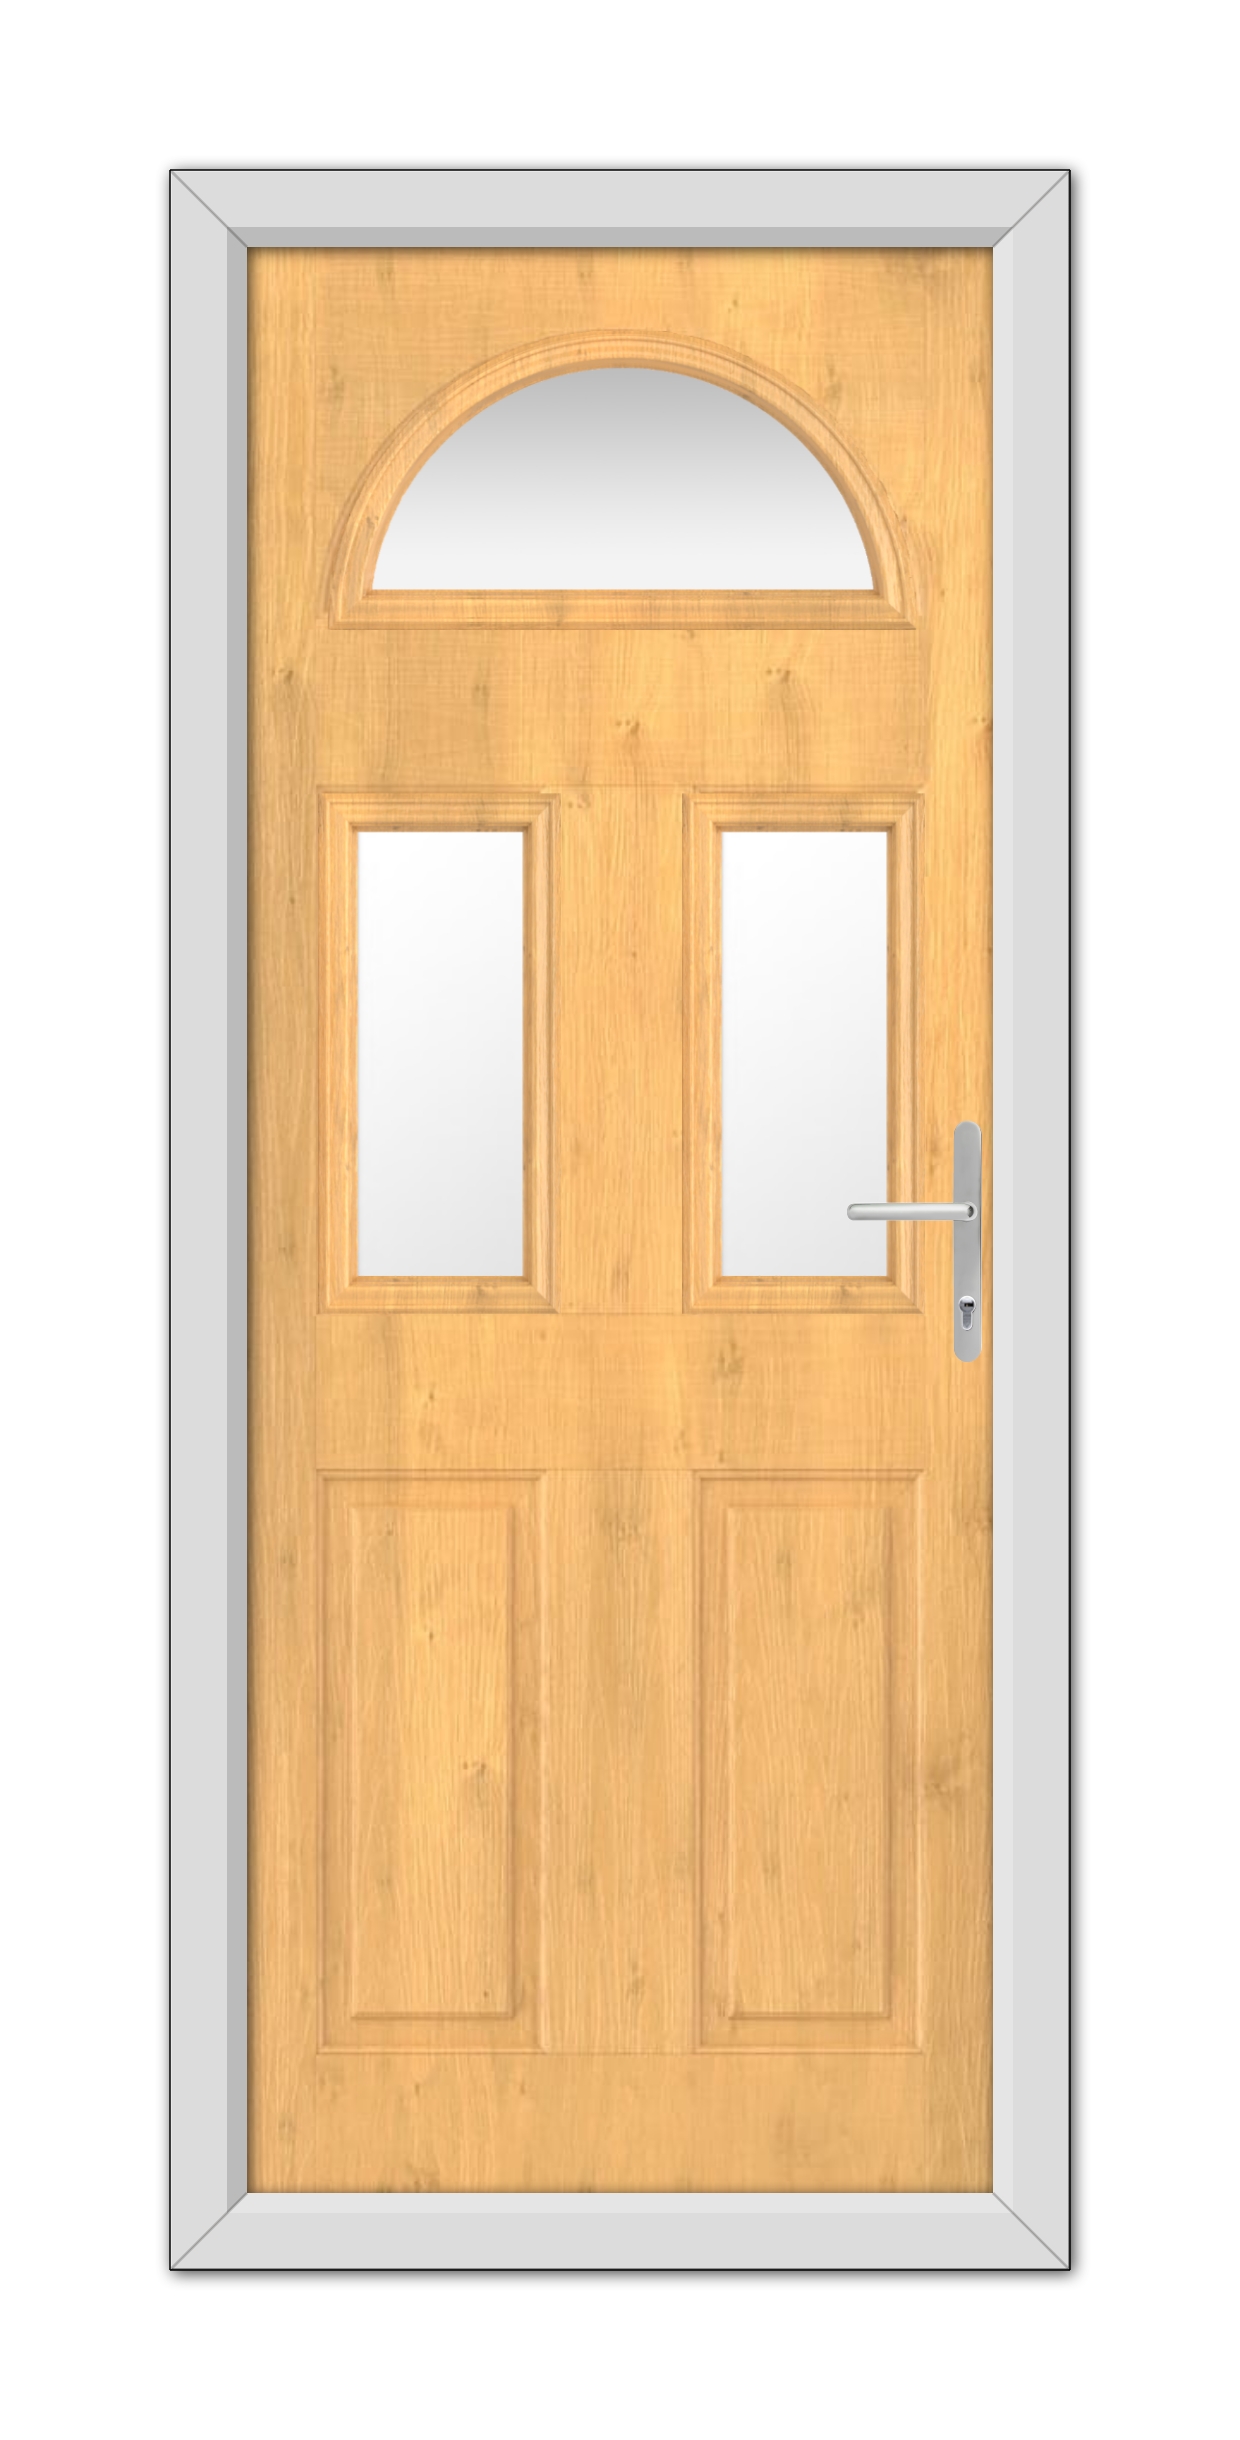 Irish Oak Winslow 3 Composite Door 48mm Timber Core with an arched window at the top and two square windows, featuring a modern handle, framed in a white doorframe.